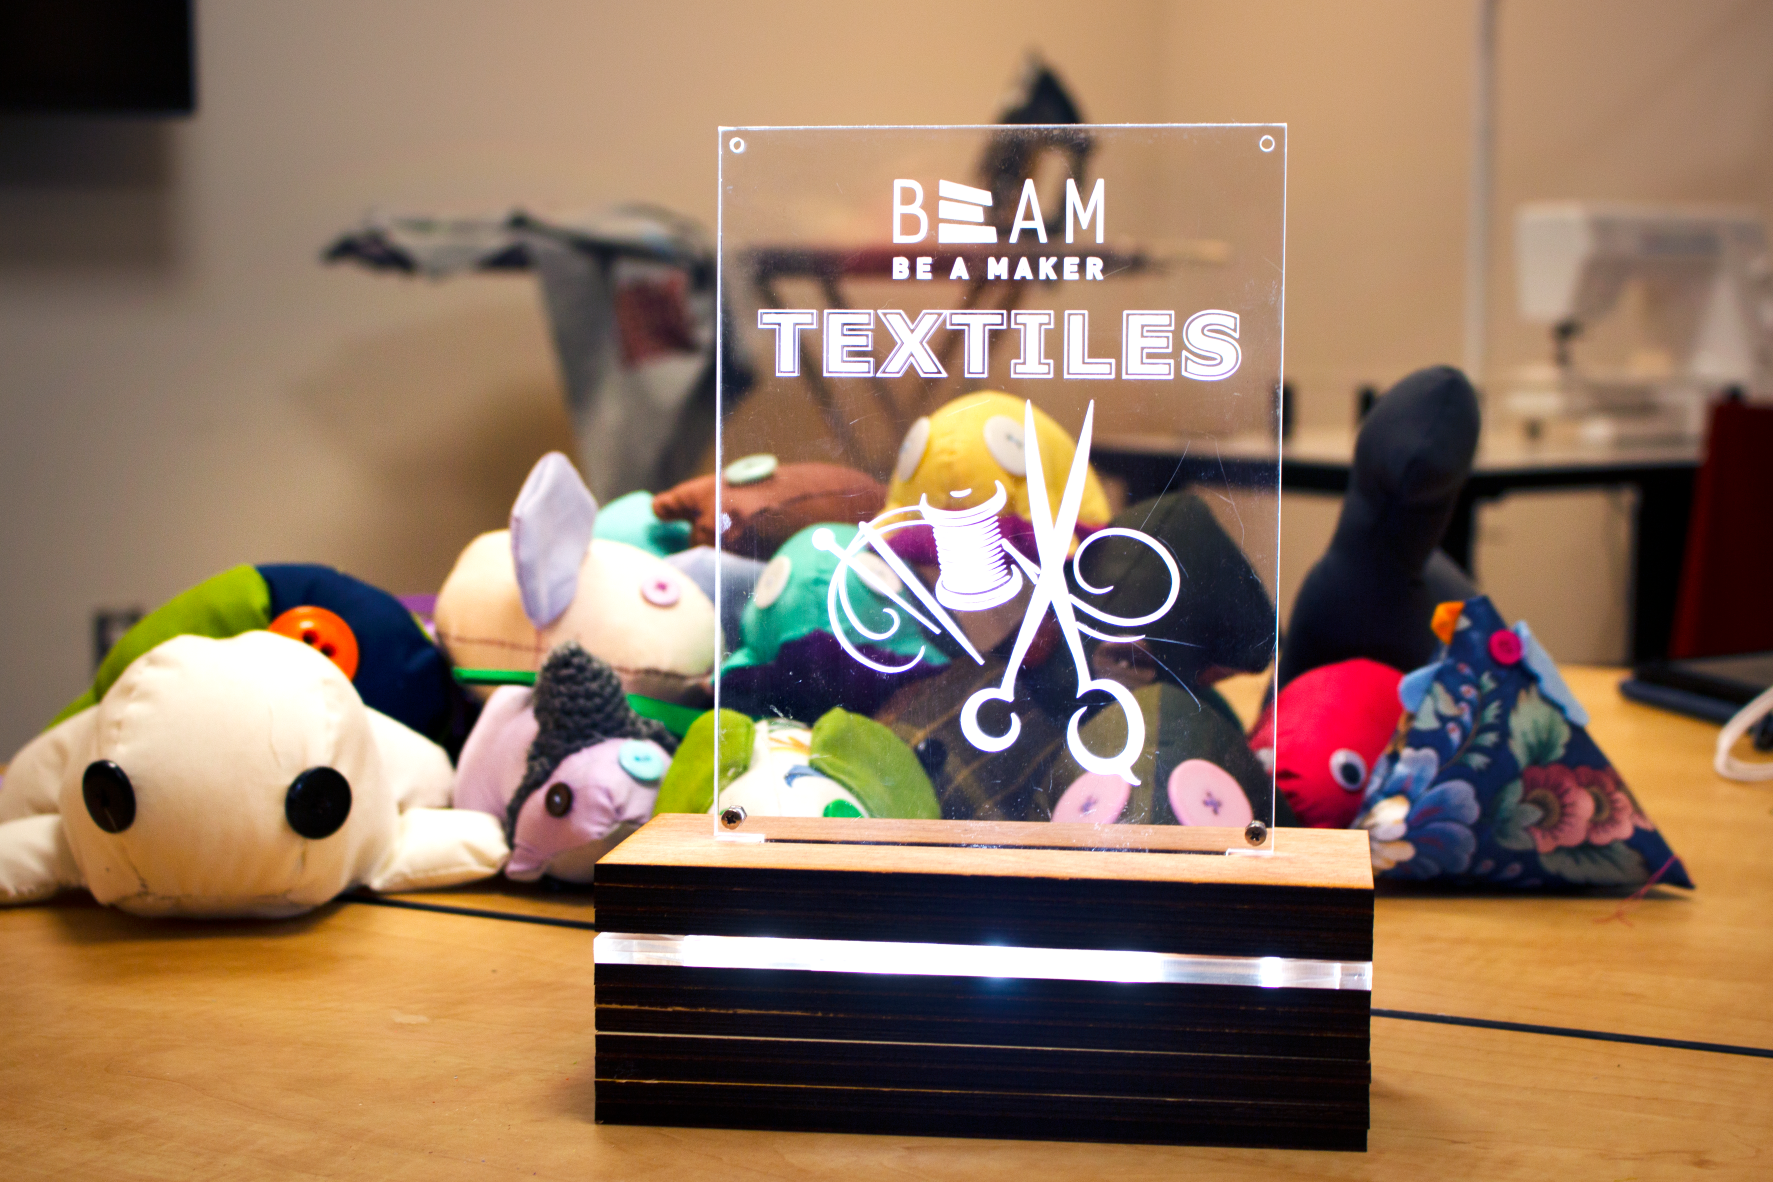 Stuffed animals and a custom-made lamp with a BeAM textiles logo sit on a table.